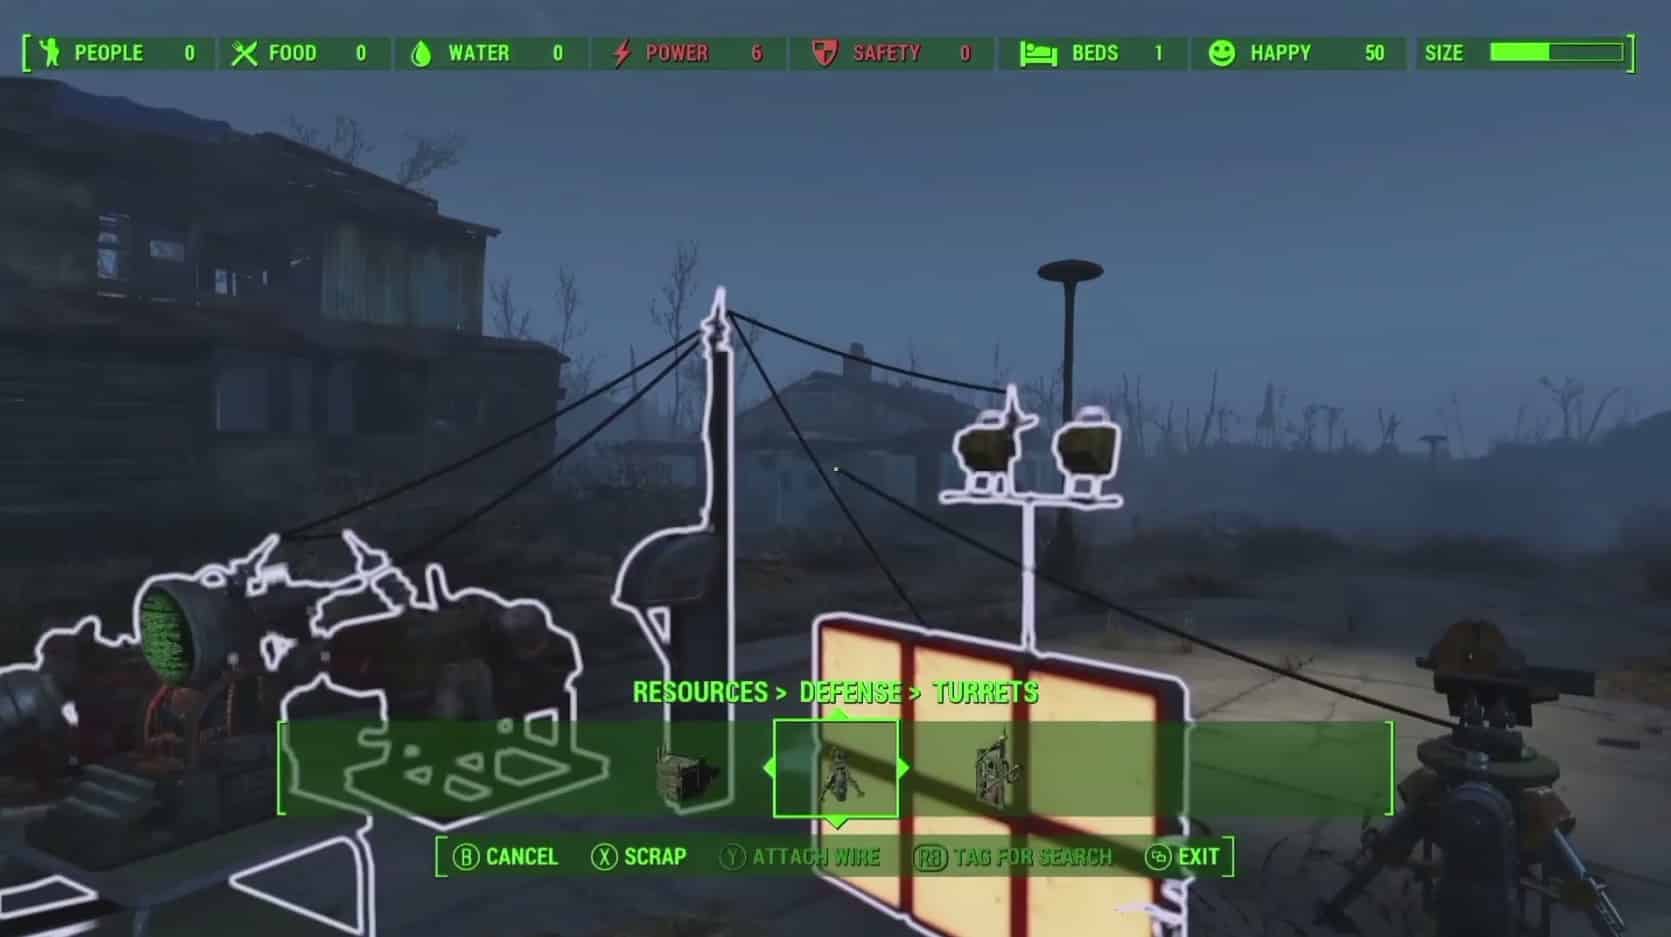 Fallout 4 Tower Defense Turrets Xbox One PS4 PC Gameplay Screenshot